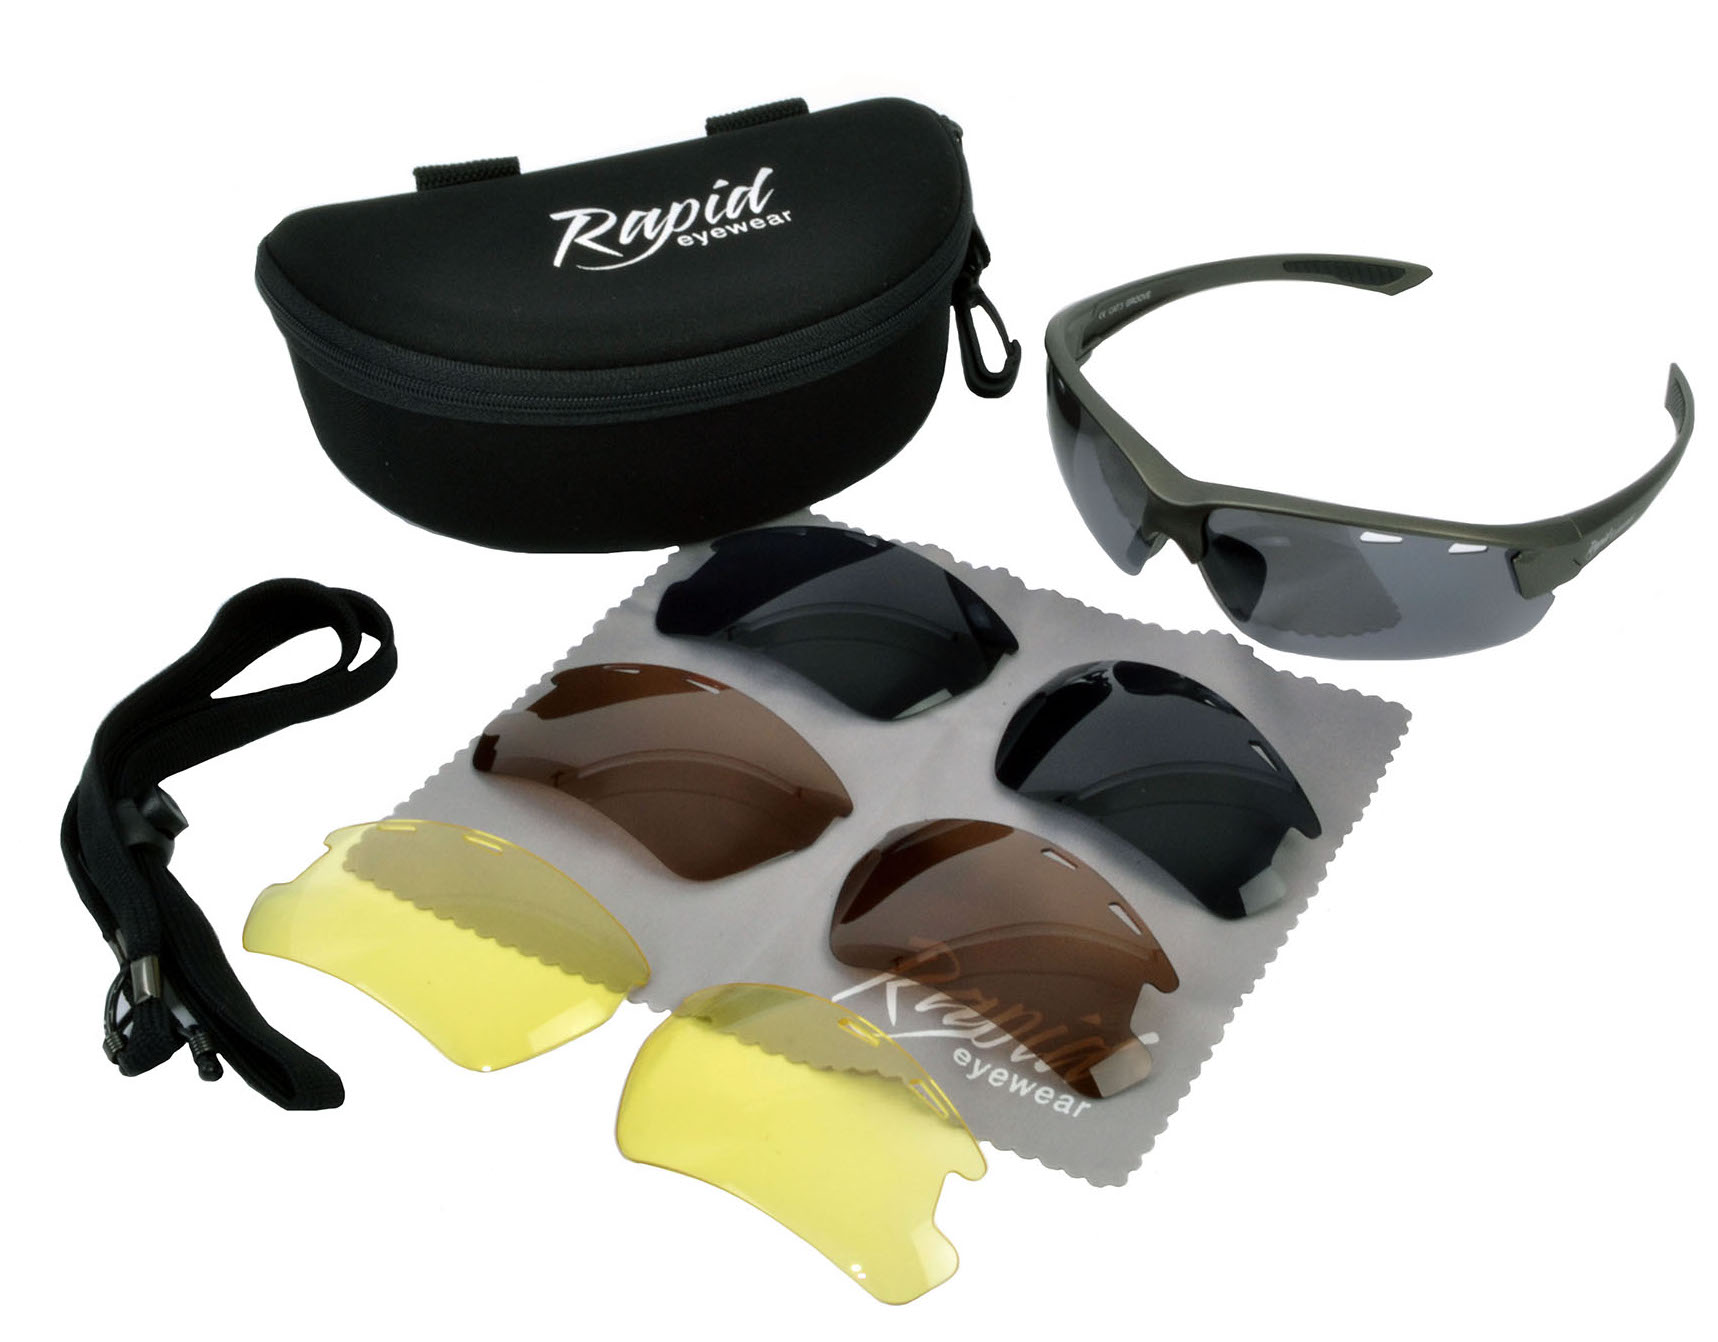 Groove sunglasses for RC